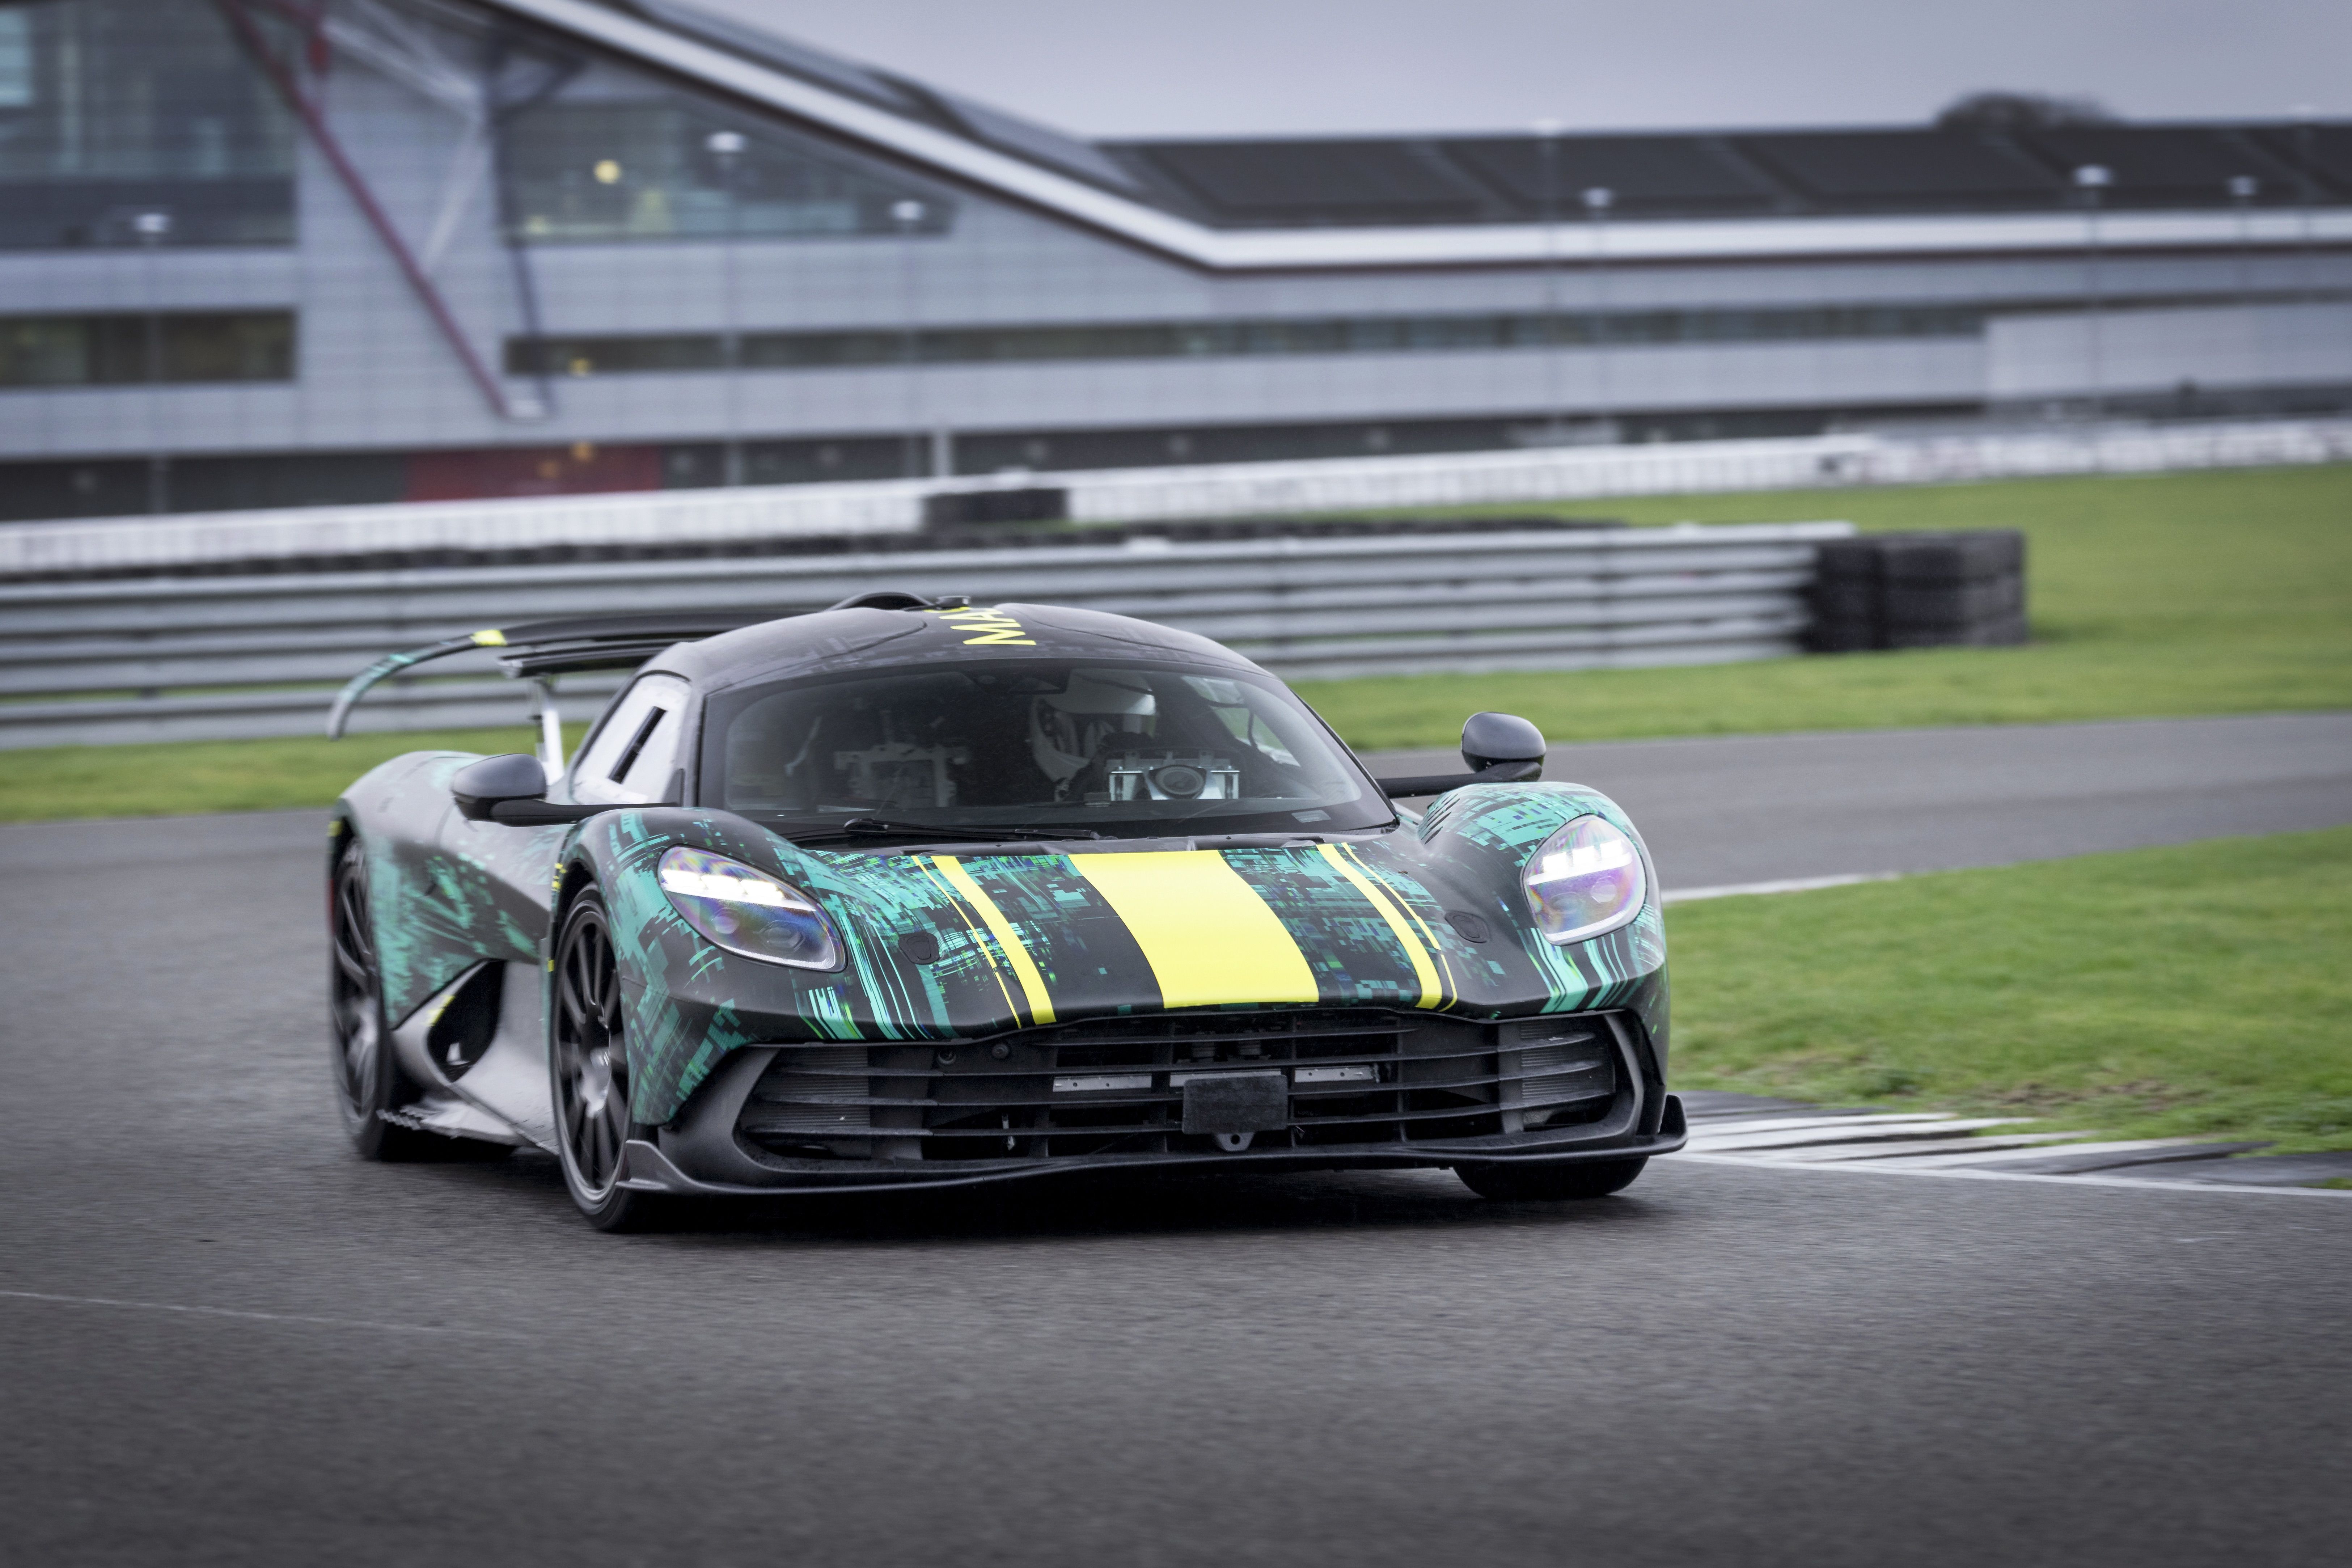 Aston Martin Valhalla Shown Testing in All Its 998-HP Hybrid Glory